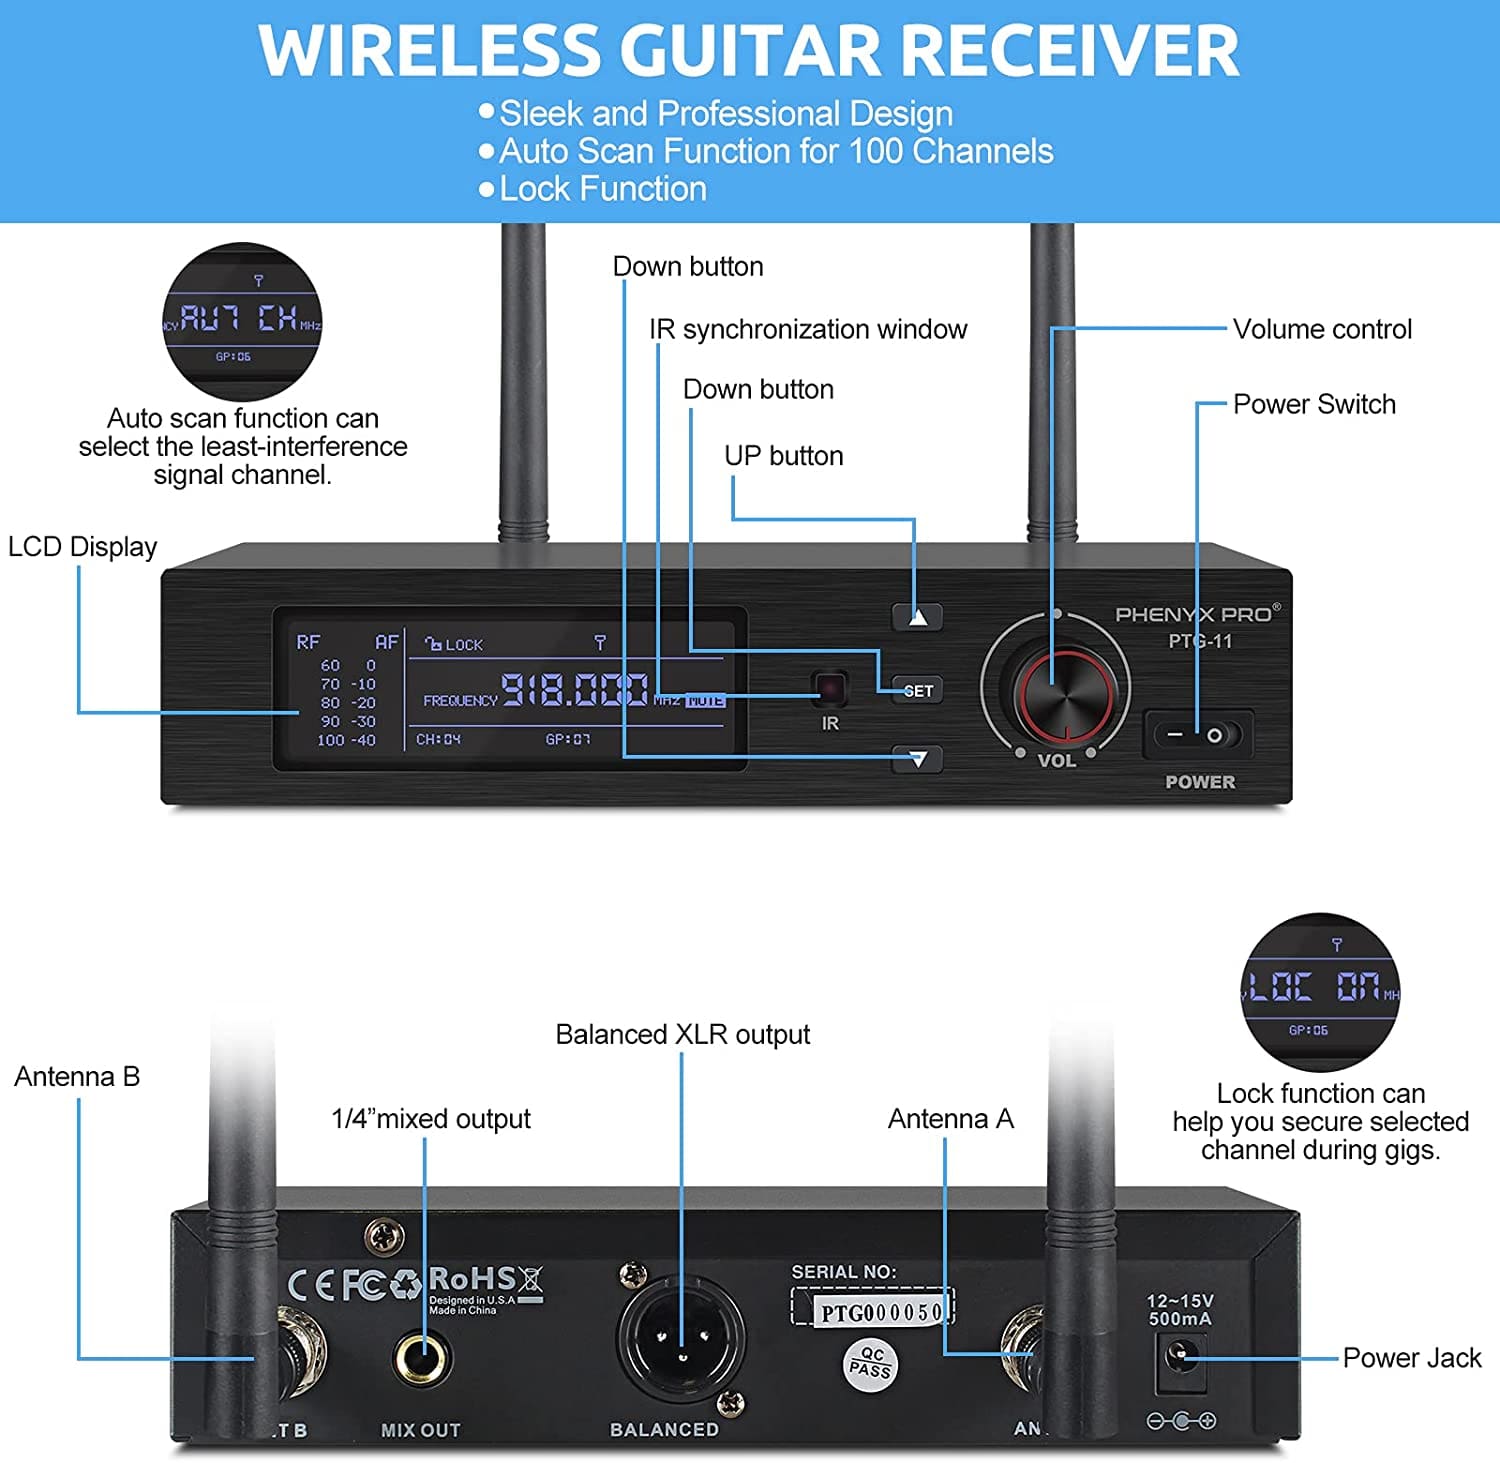 Phenyx Pro PTG-11 UHF True Diversity Wireless Guitar System, Auto scan function receiver with balanced XLR output